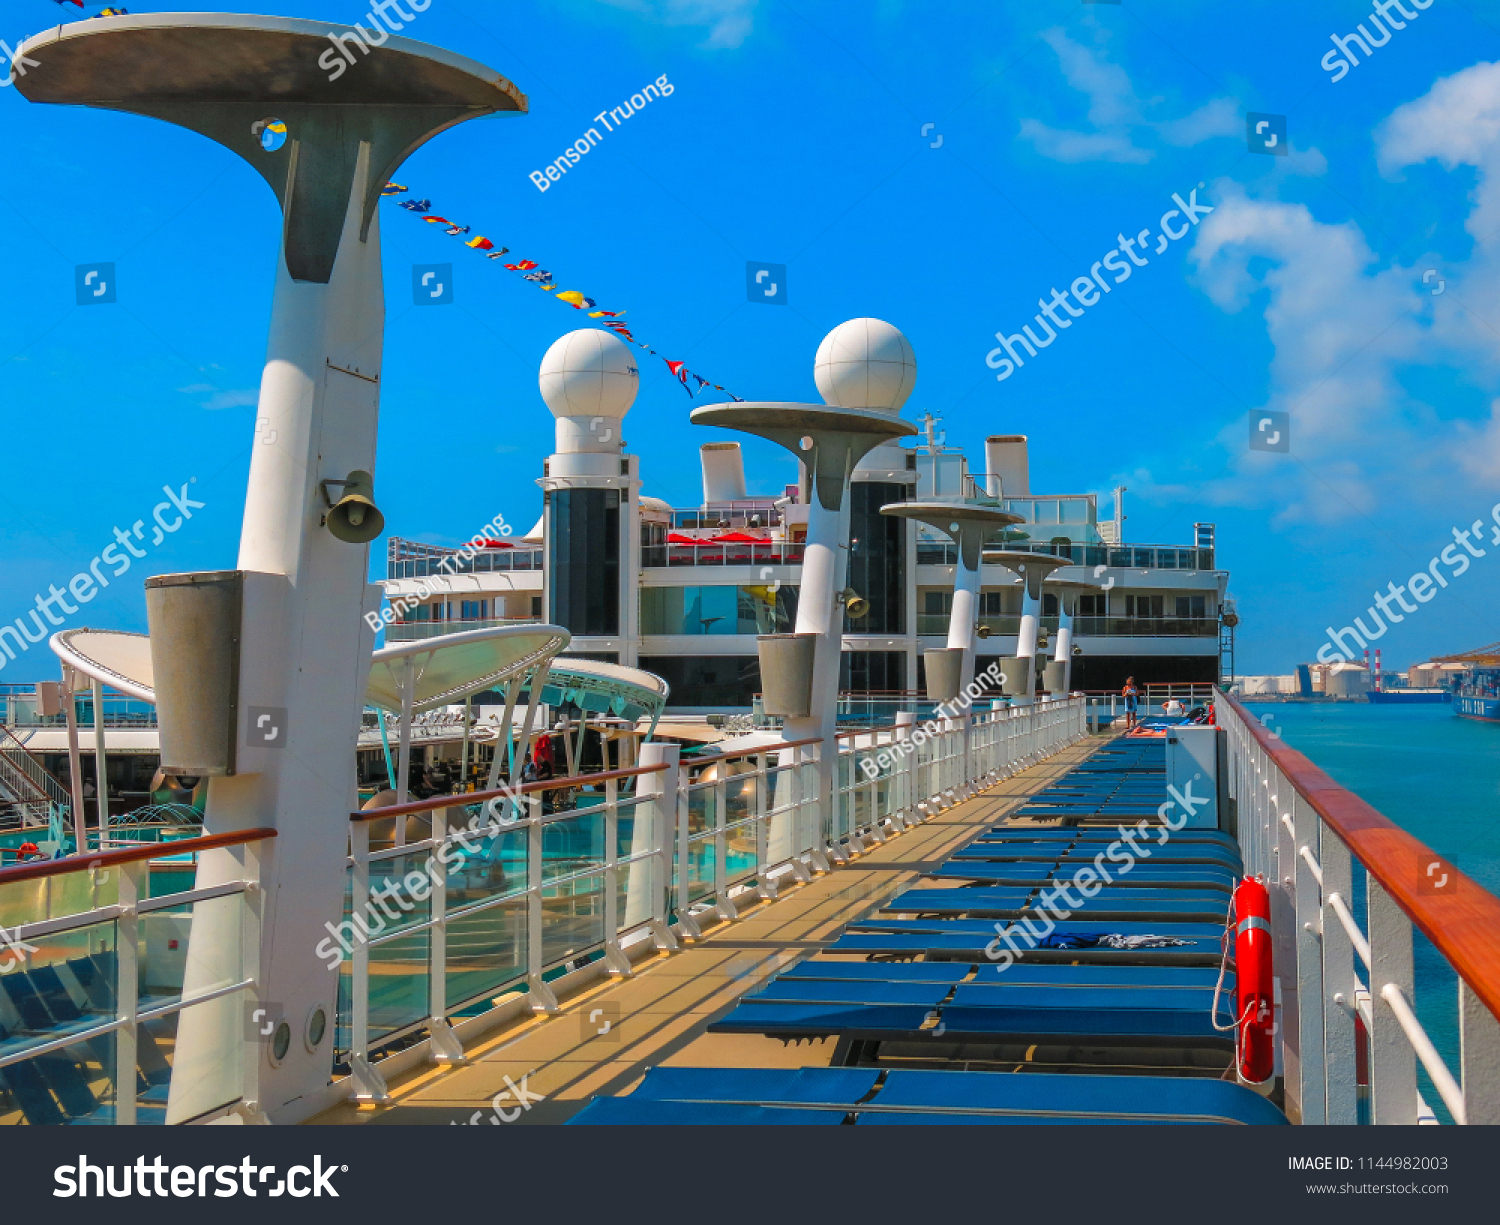 Naples, Italy. July 2nd, 2014. Sun chairs and a jogging track on the top deck of Norwegian Cruise Line Epic. Taken while docked on a sunny day.  #1144982003